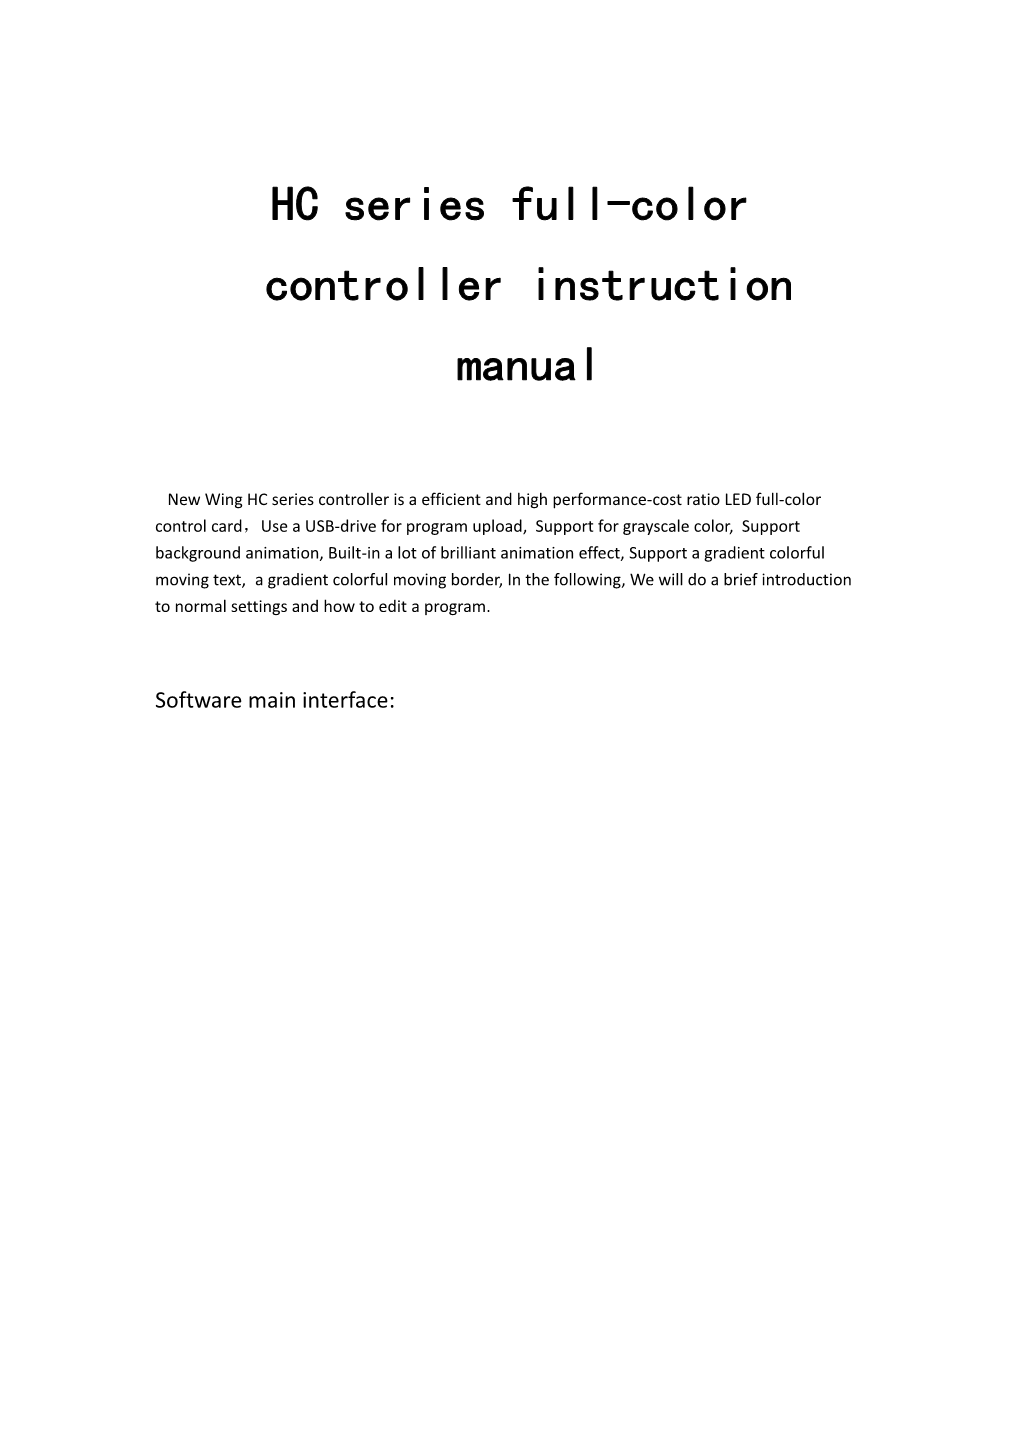 HC Series Full-Color Controller Instruction Manual